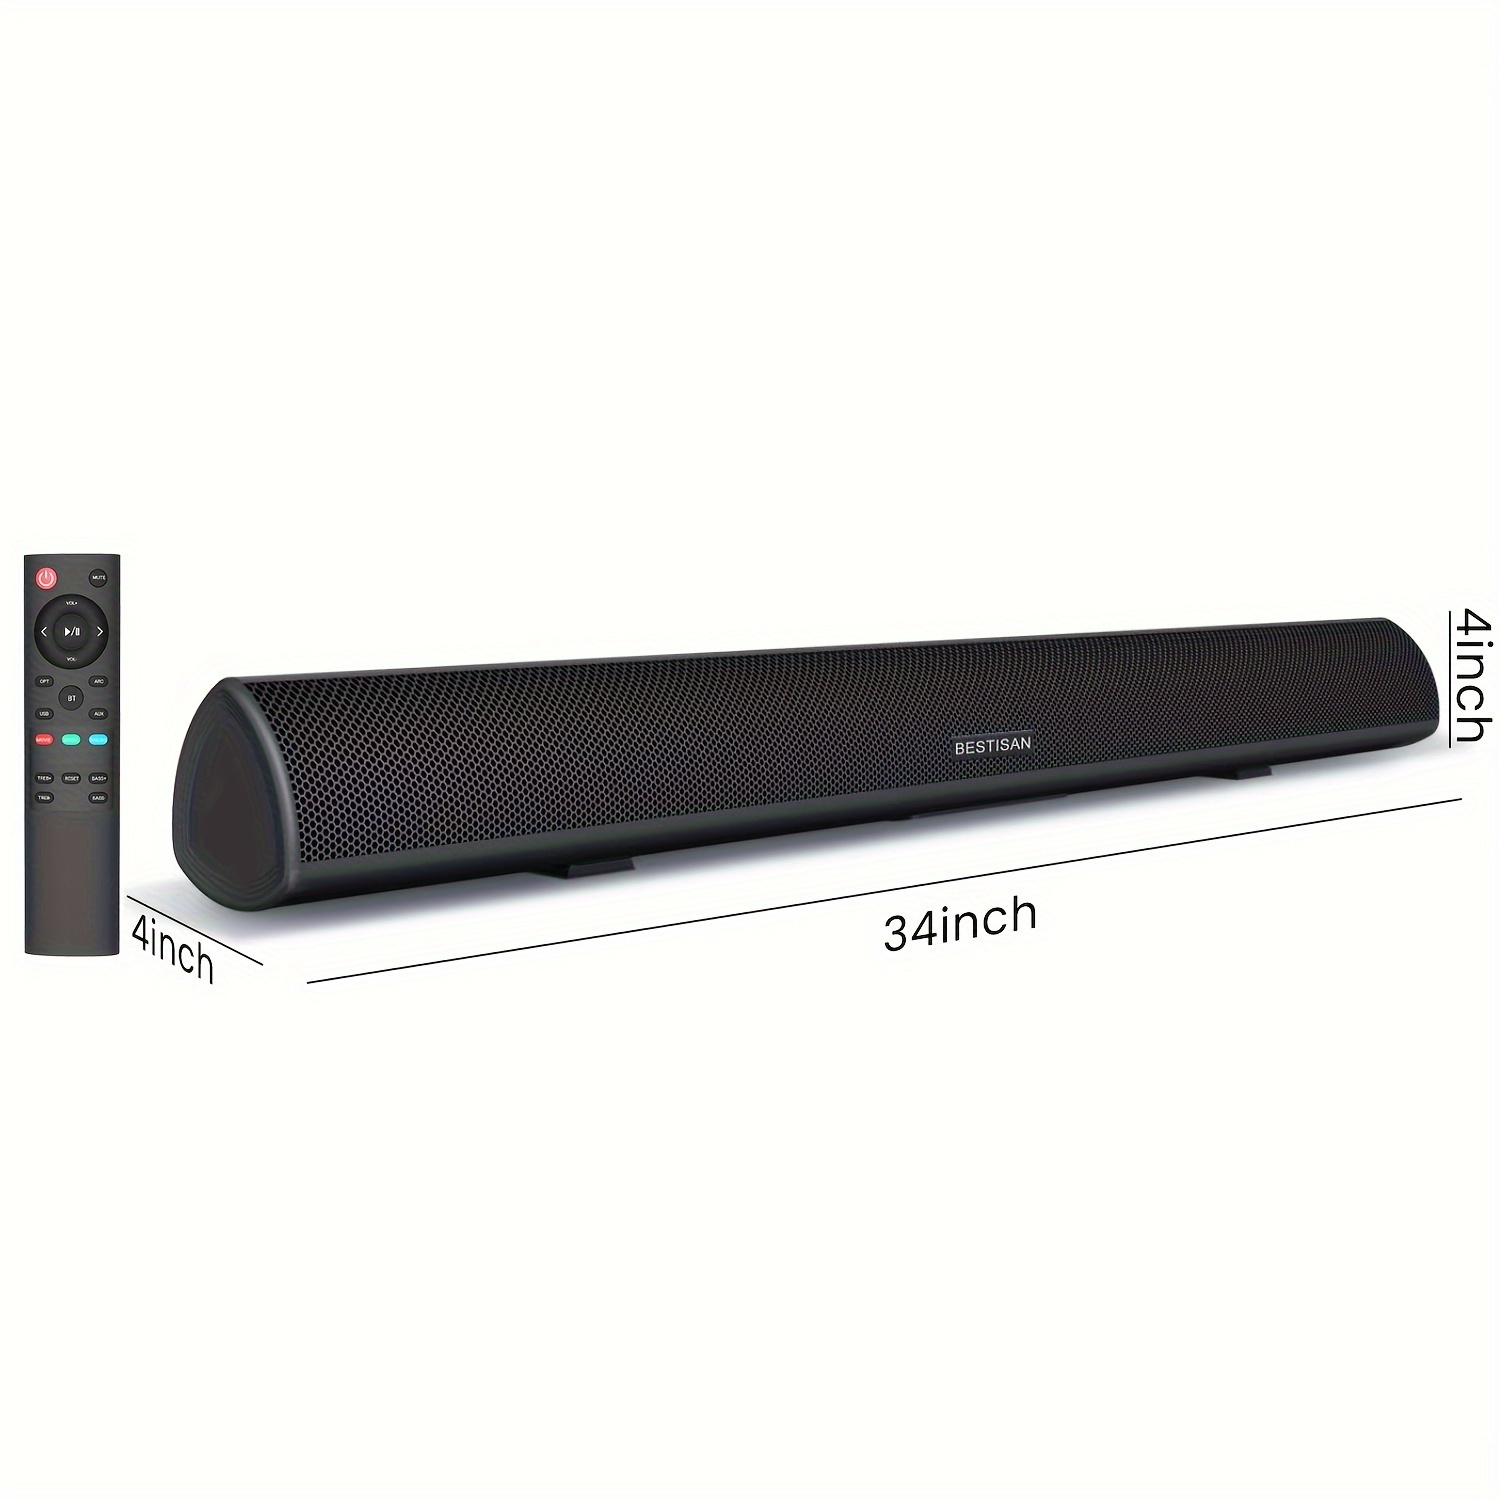 

80watt 34inch Sound Bar, Soundbar Bt 5.0 Wireless And Wired Home Theater Speaker (dsp, Arc, Bass Adjustable, Optical Cable Included)